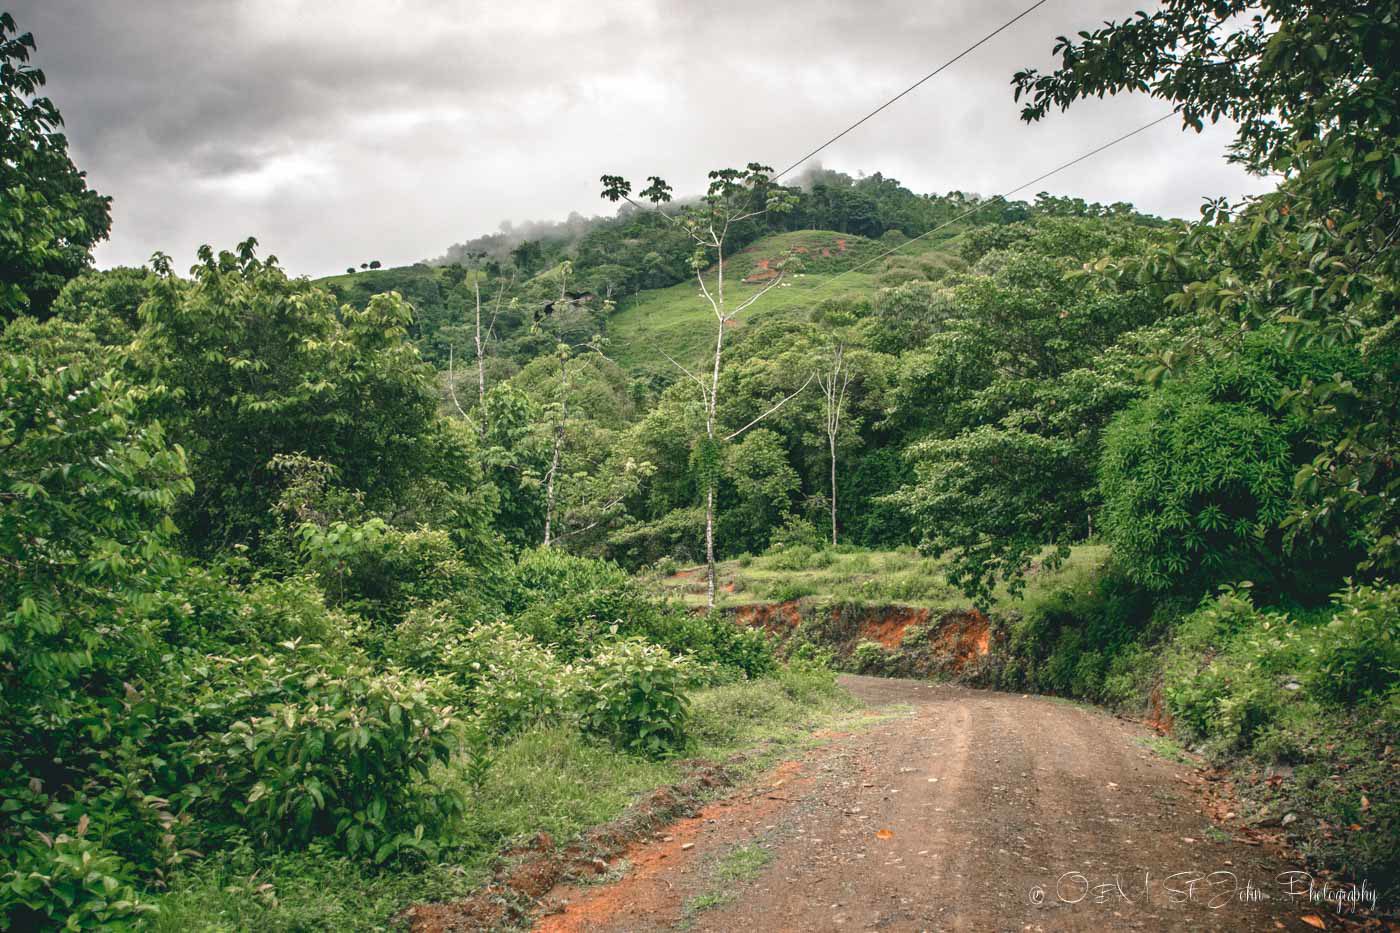 Driving in Costa Rica can be a bit challenging at times